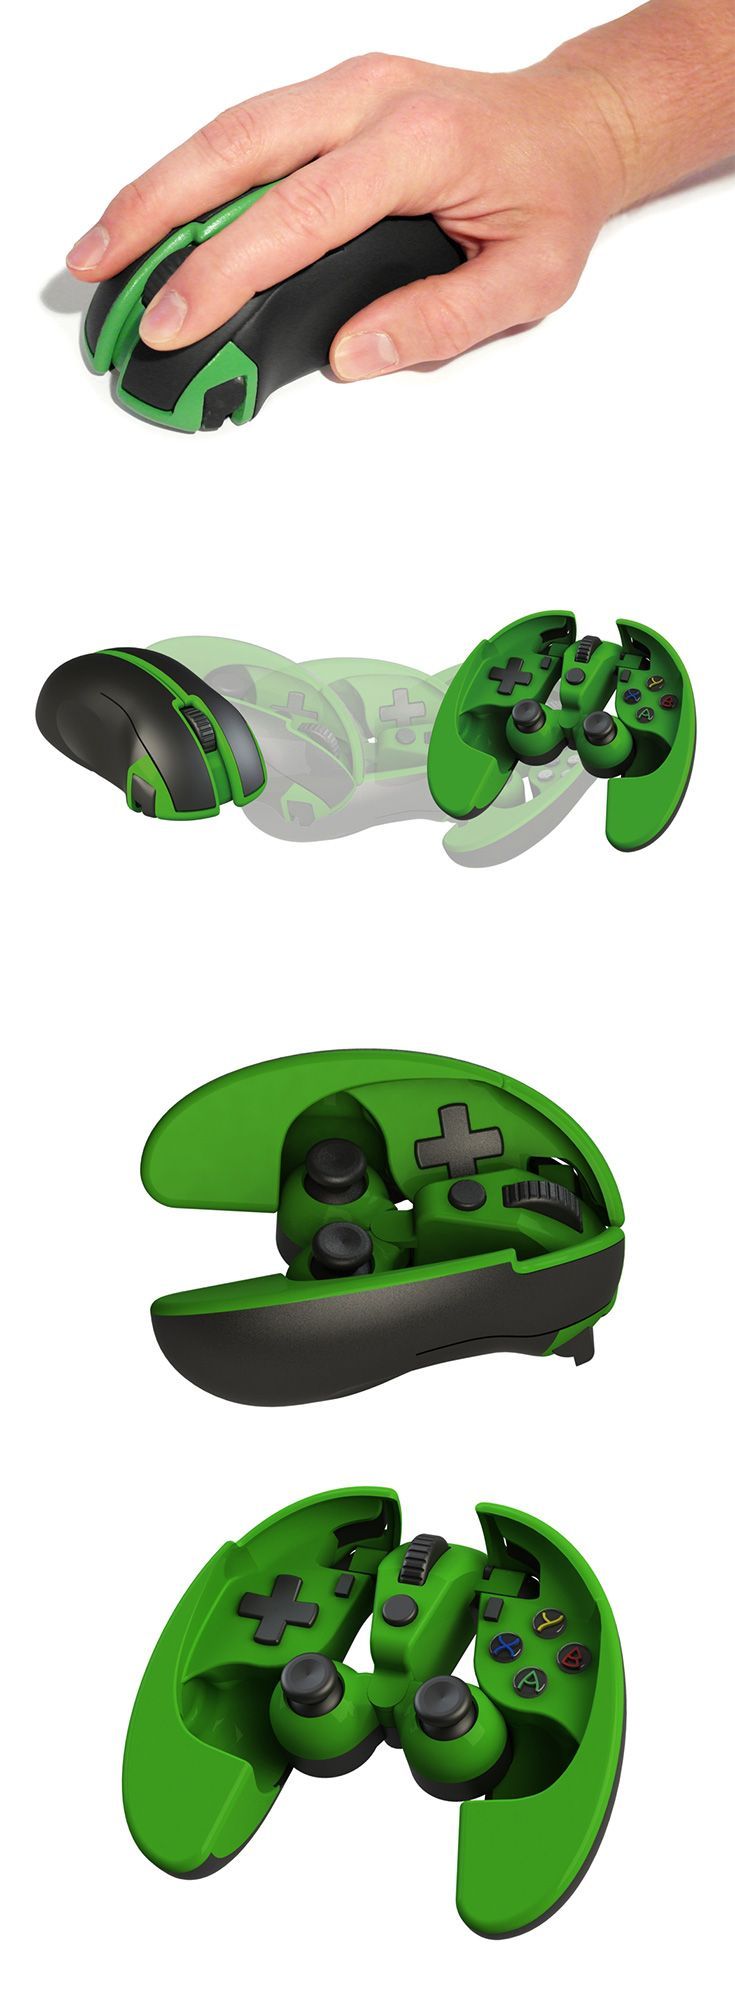 The Scarab Mouse/Gamepad is a mouse that transforms into a fully functio